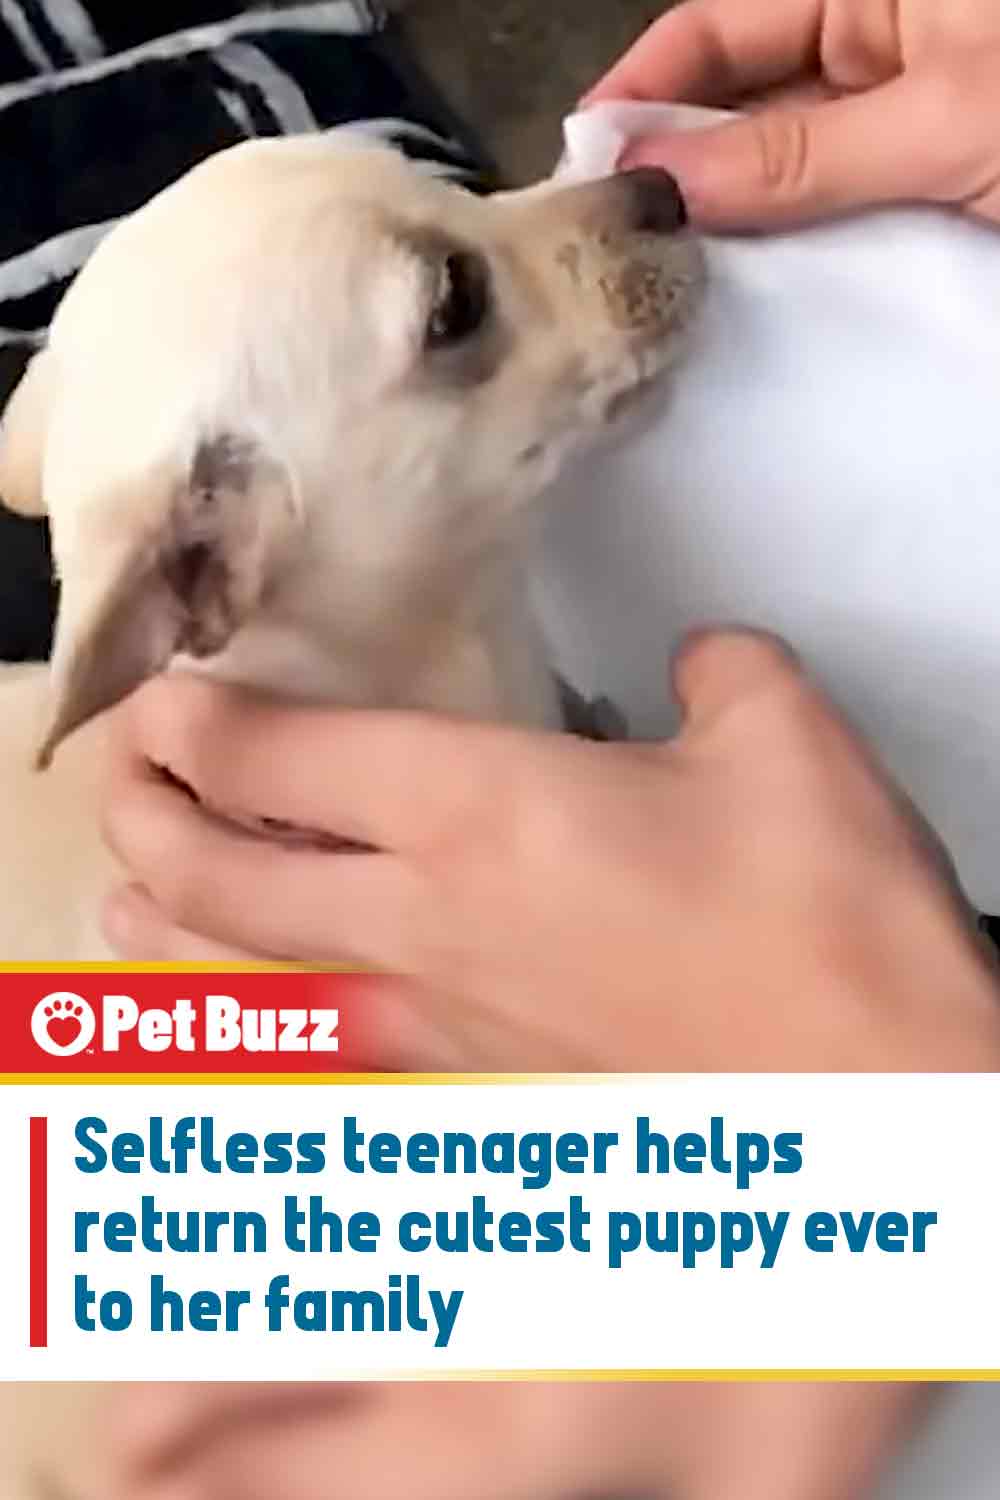 Selfless teenager helps return the cutest puppy ever to her family